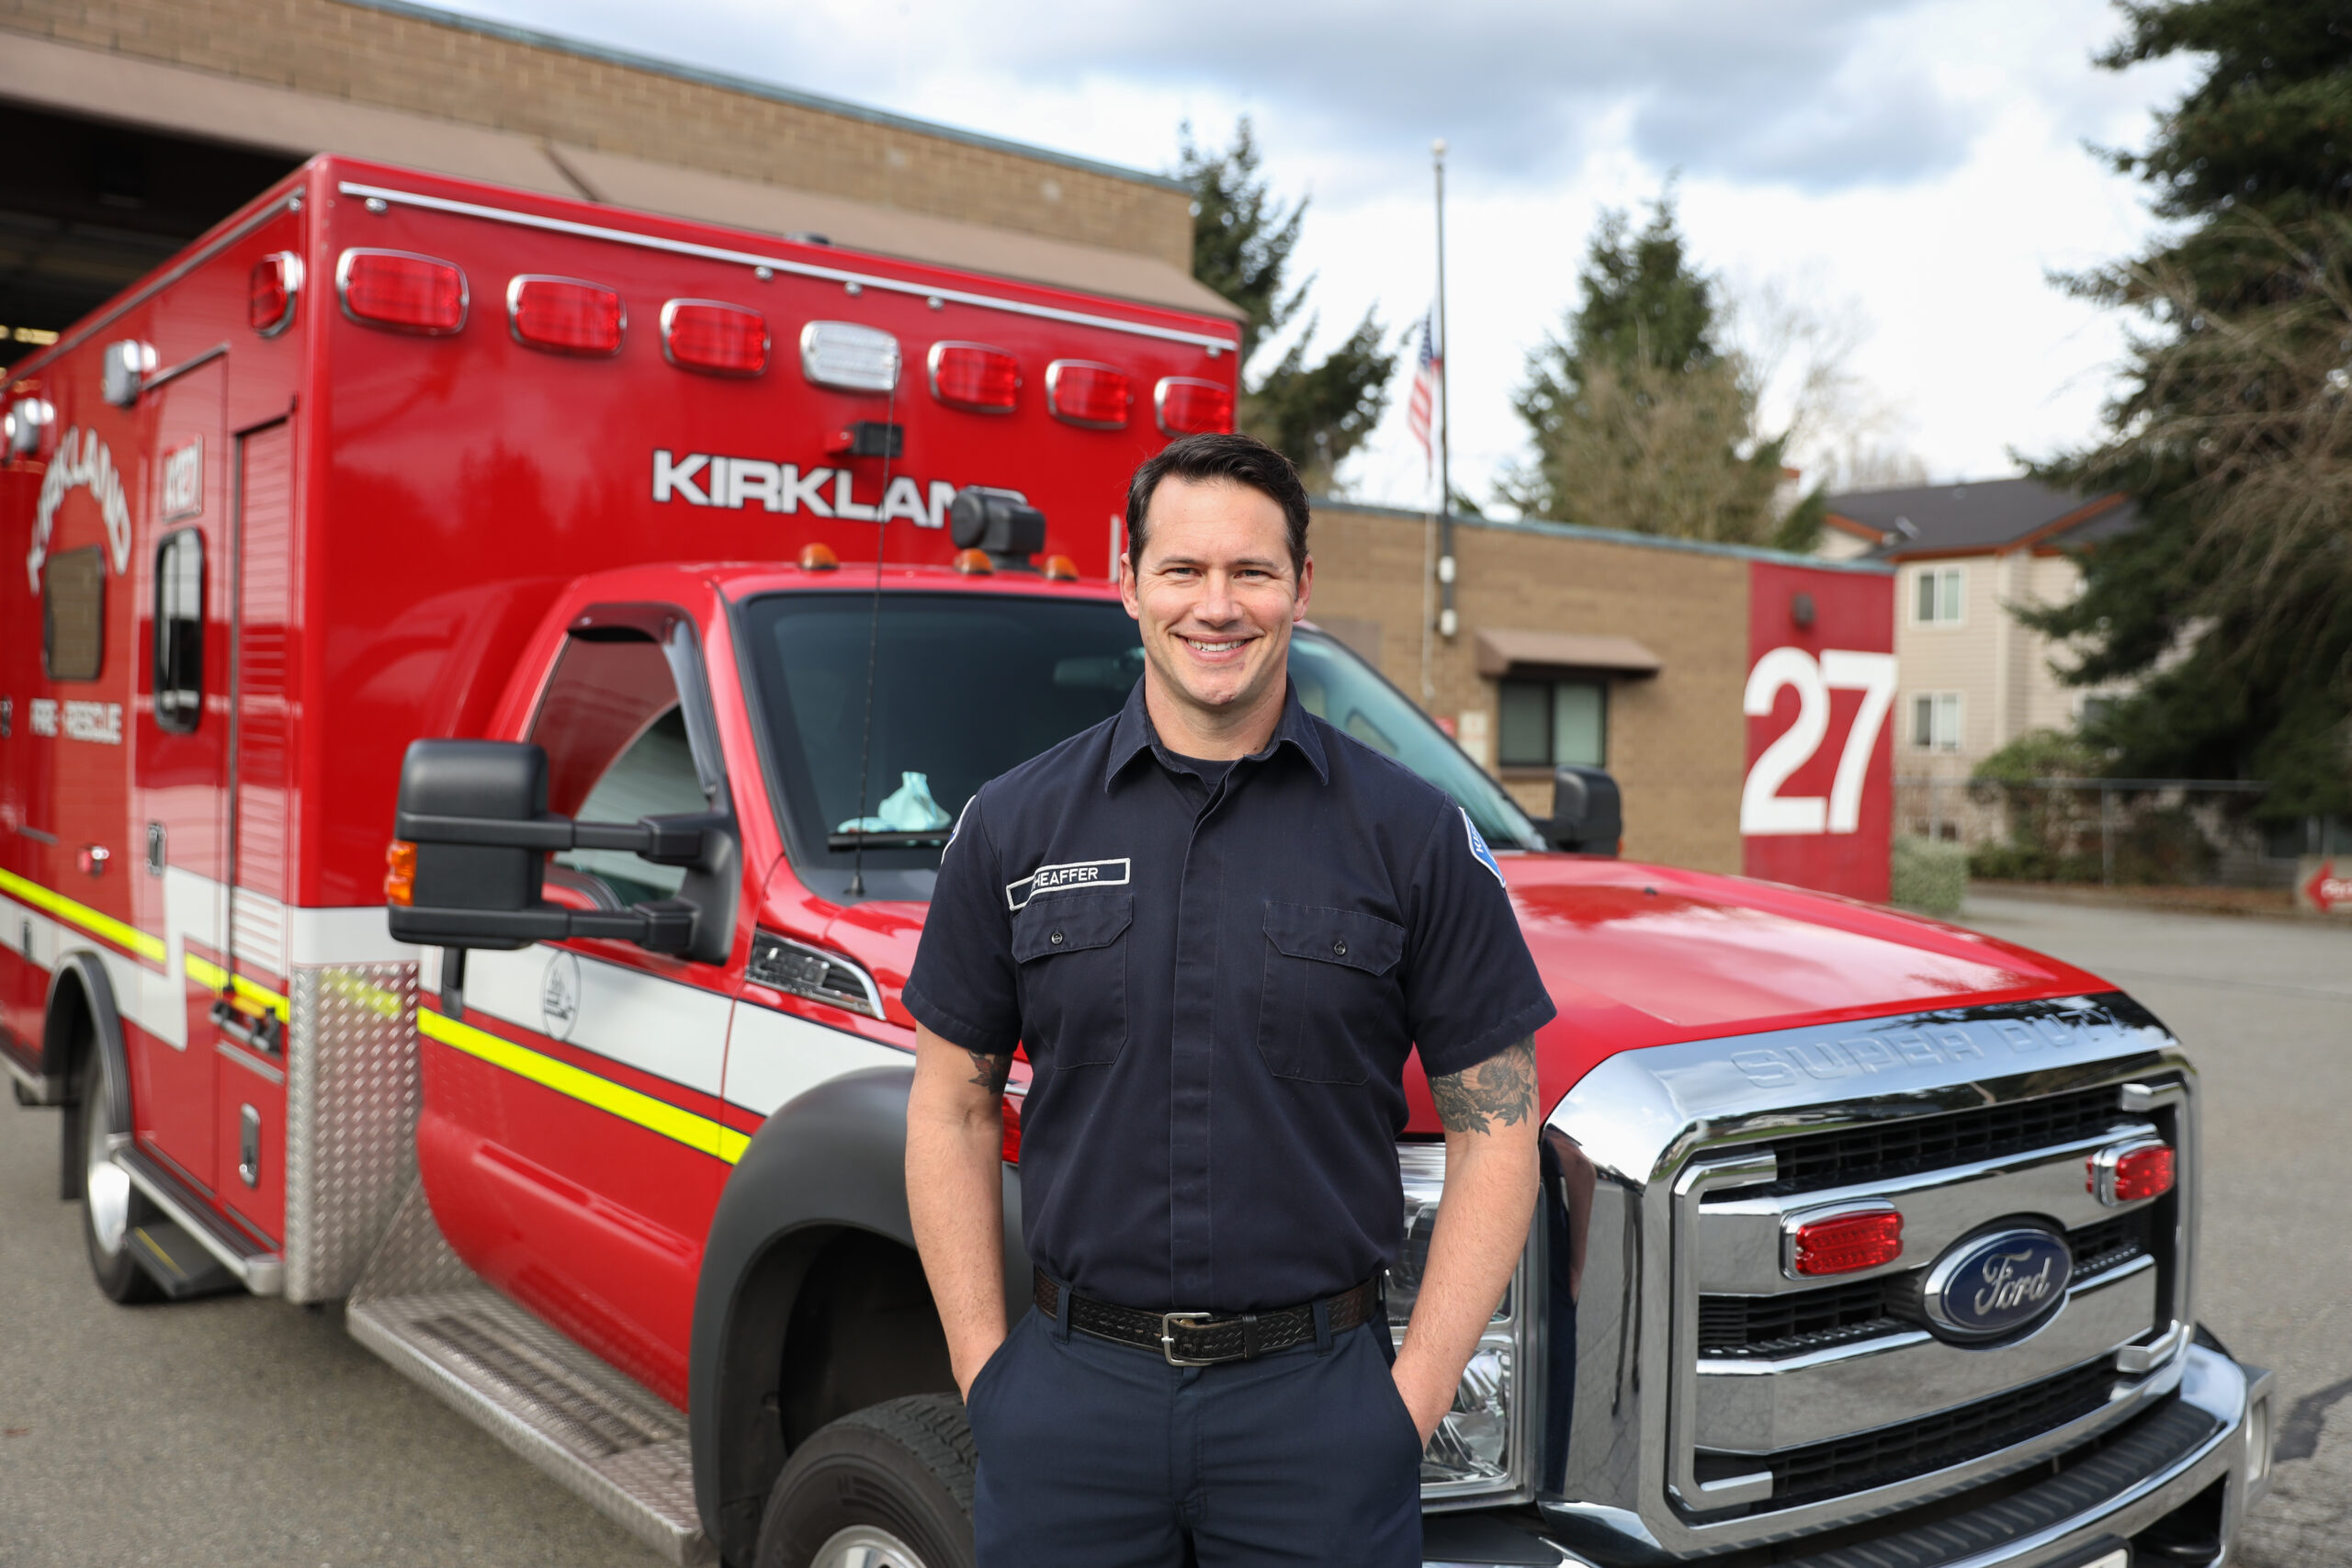 Ryan dressed in his EMT uniform standing in front of a red fire truck